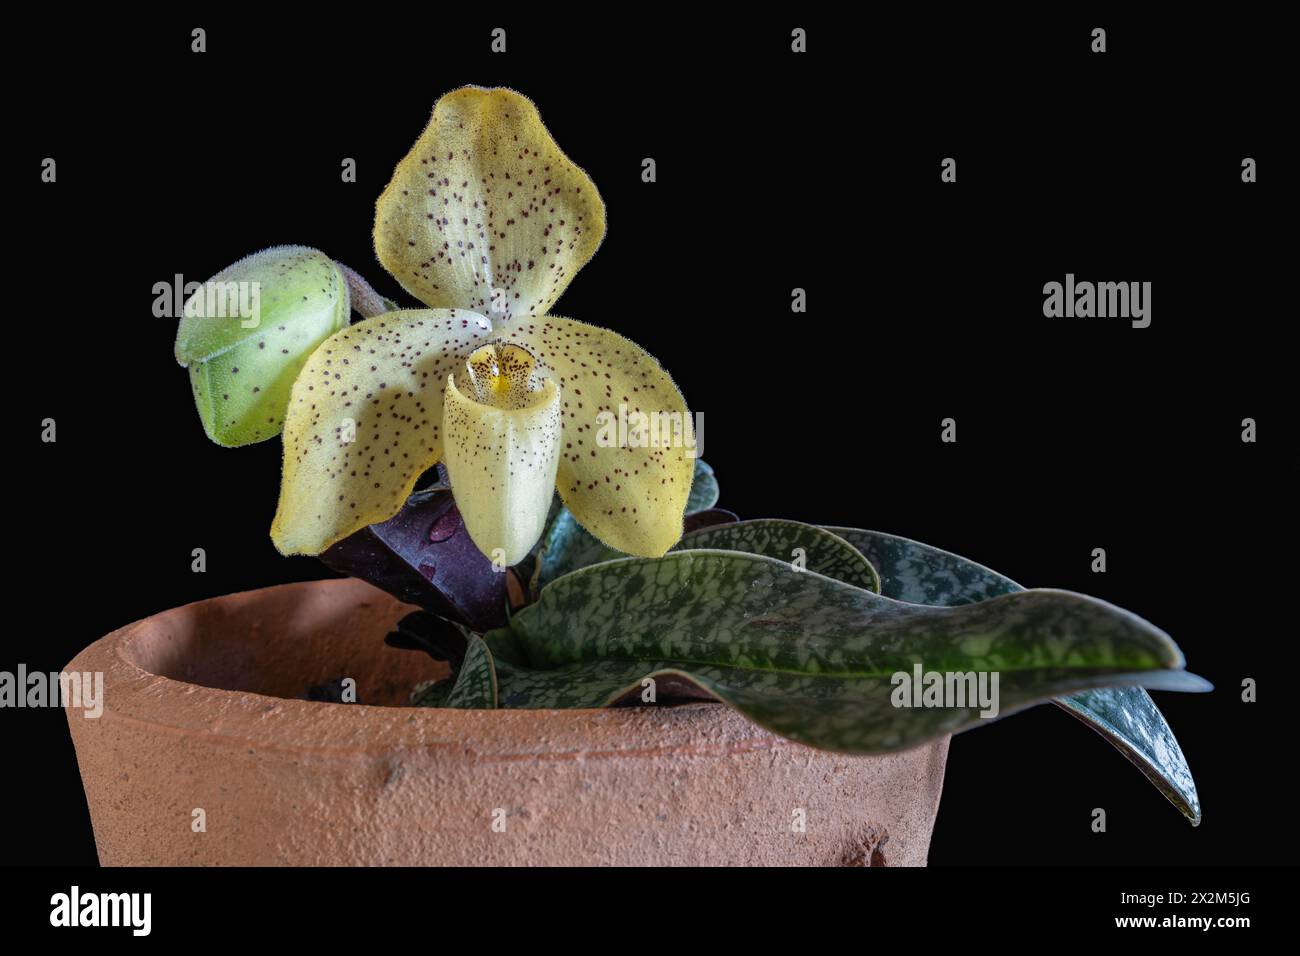 Closeup view of potted lady slipper orchid species paphiopedilum concolor with speckled yellow flower and bud isolated on black background Stock Photo